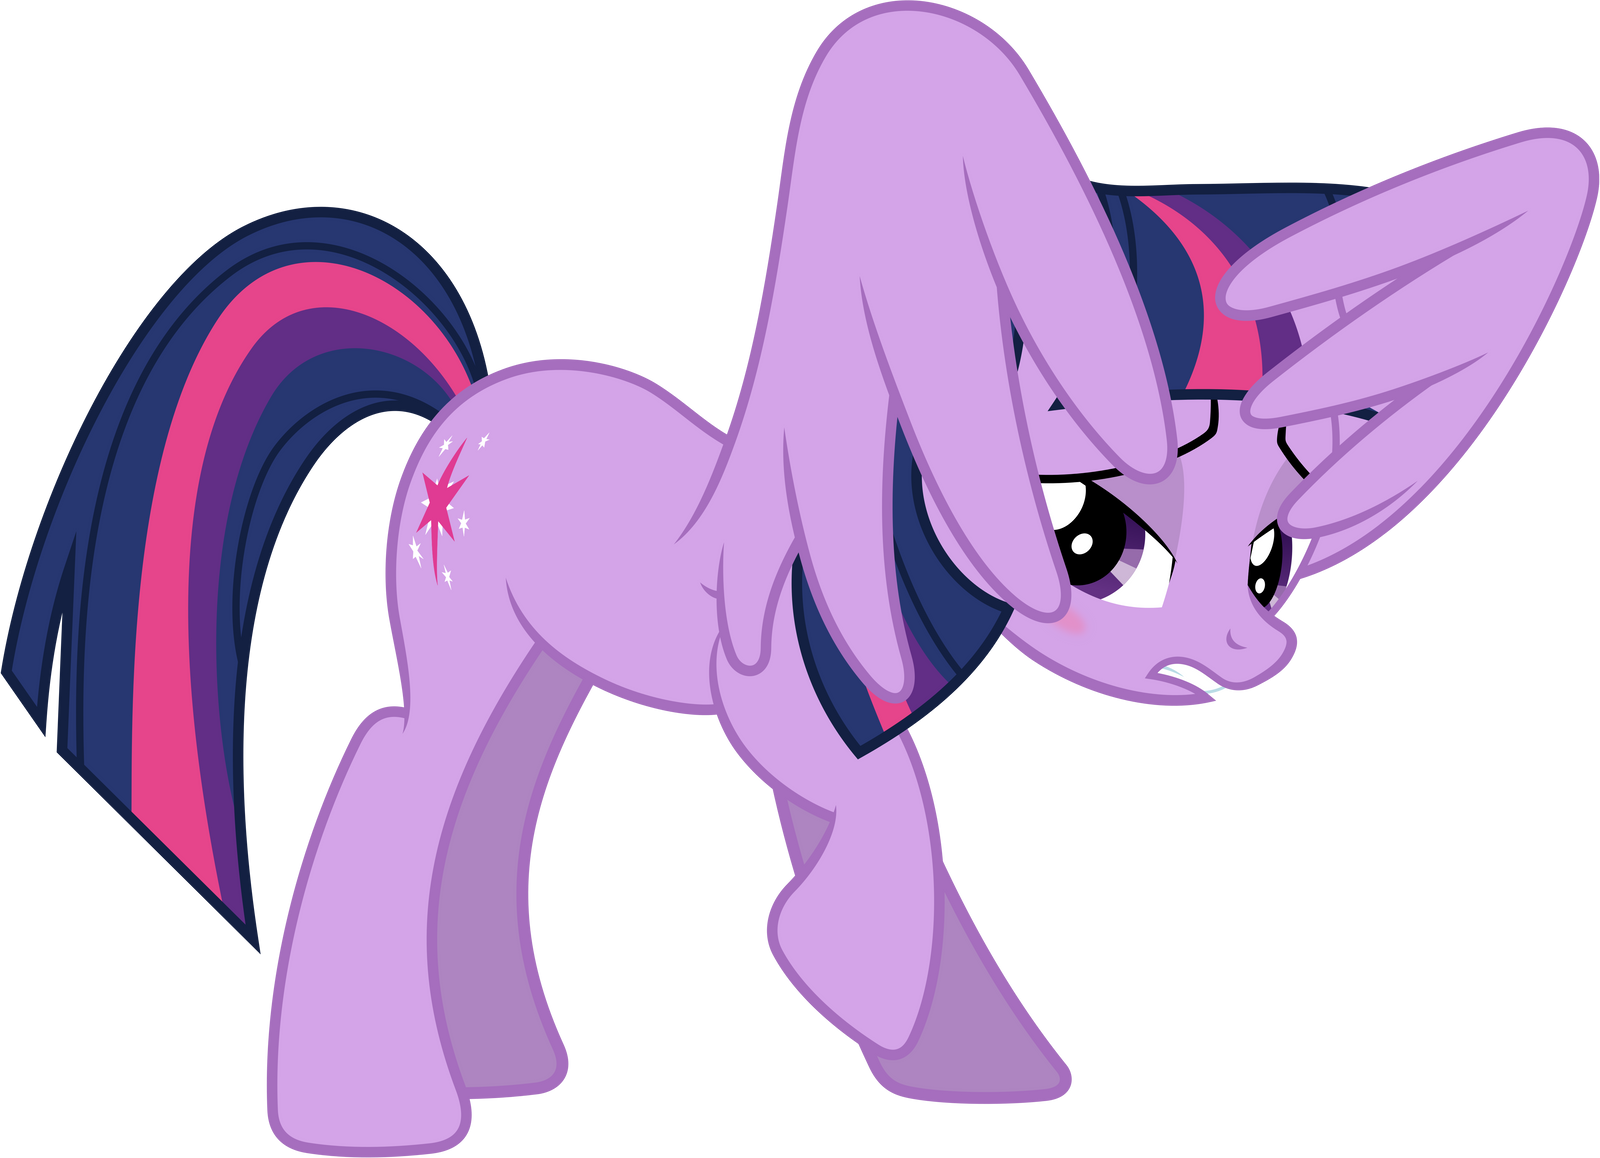 [Obrázek: embarrassed_twilight_sparkle__2__by_90sigma-d7fdk9q.png]